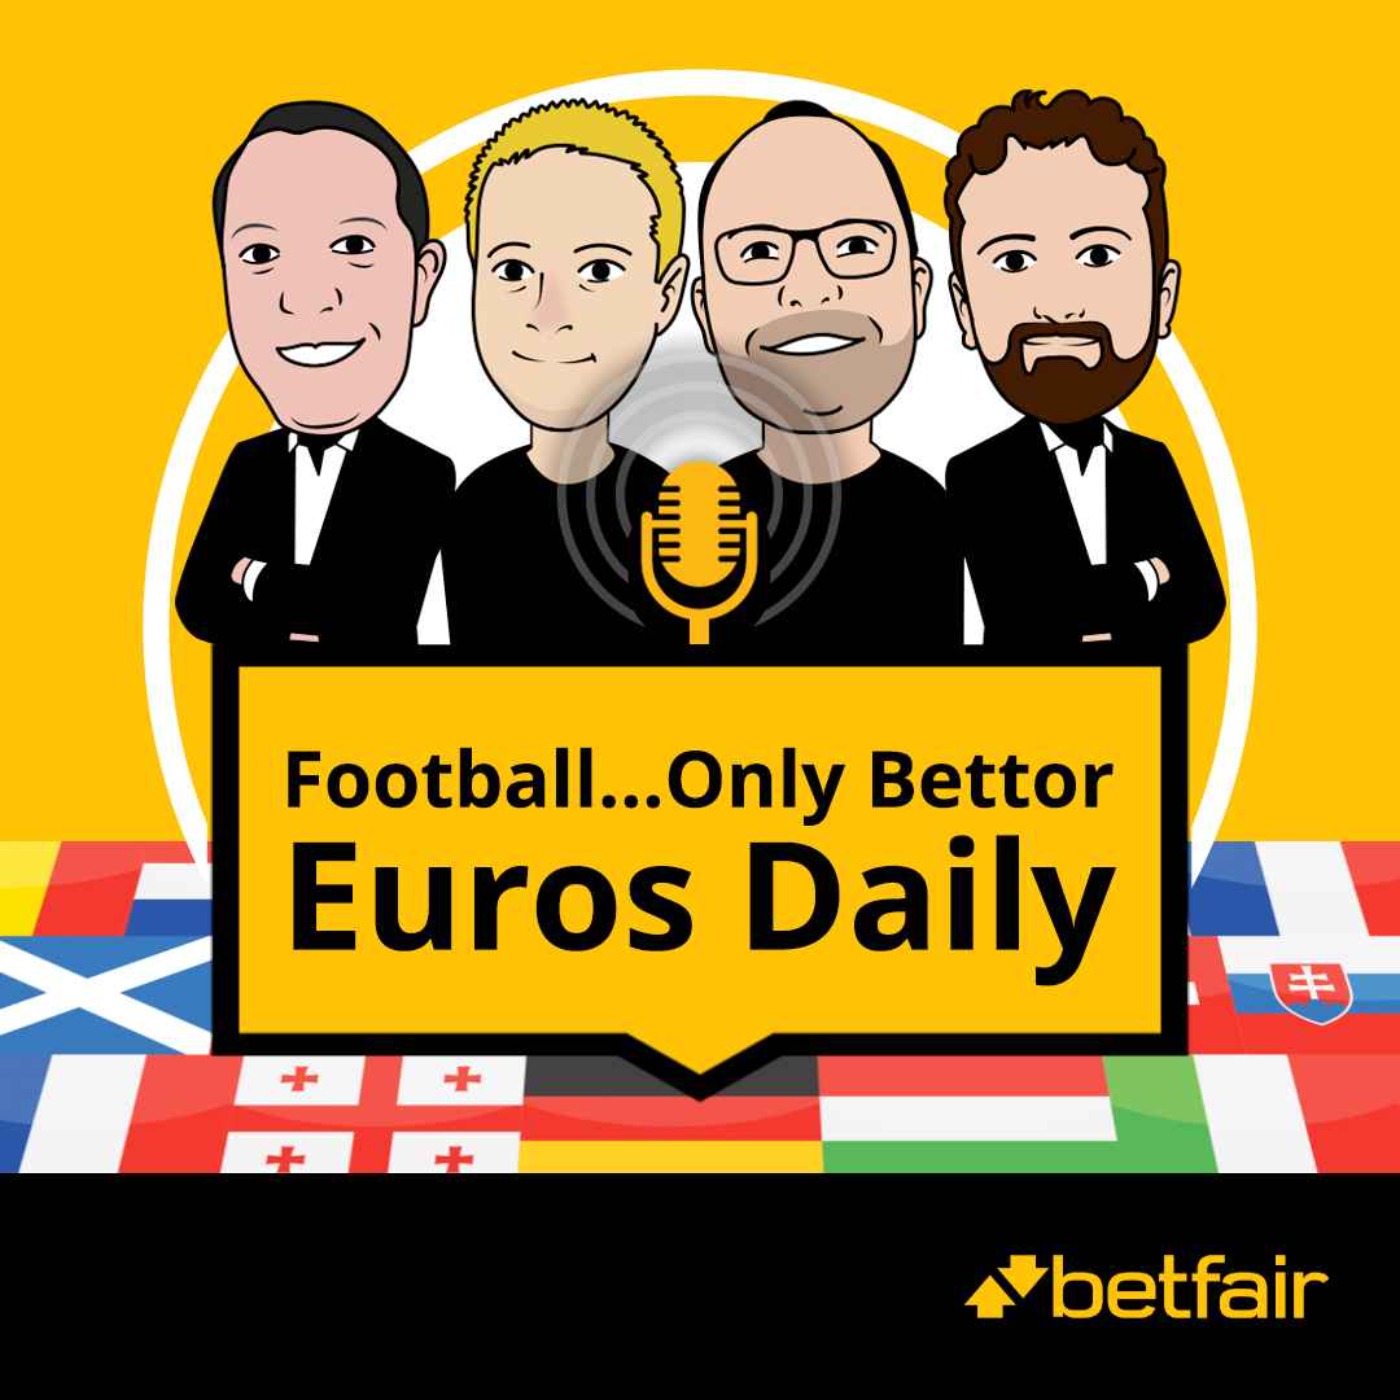 England disappoint, Spain looking good & Friday tips | Football…Only Bettor: Euros Daily